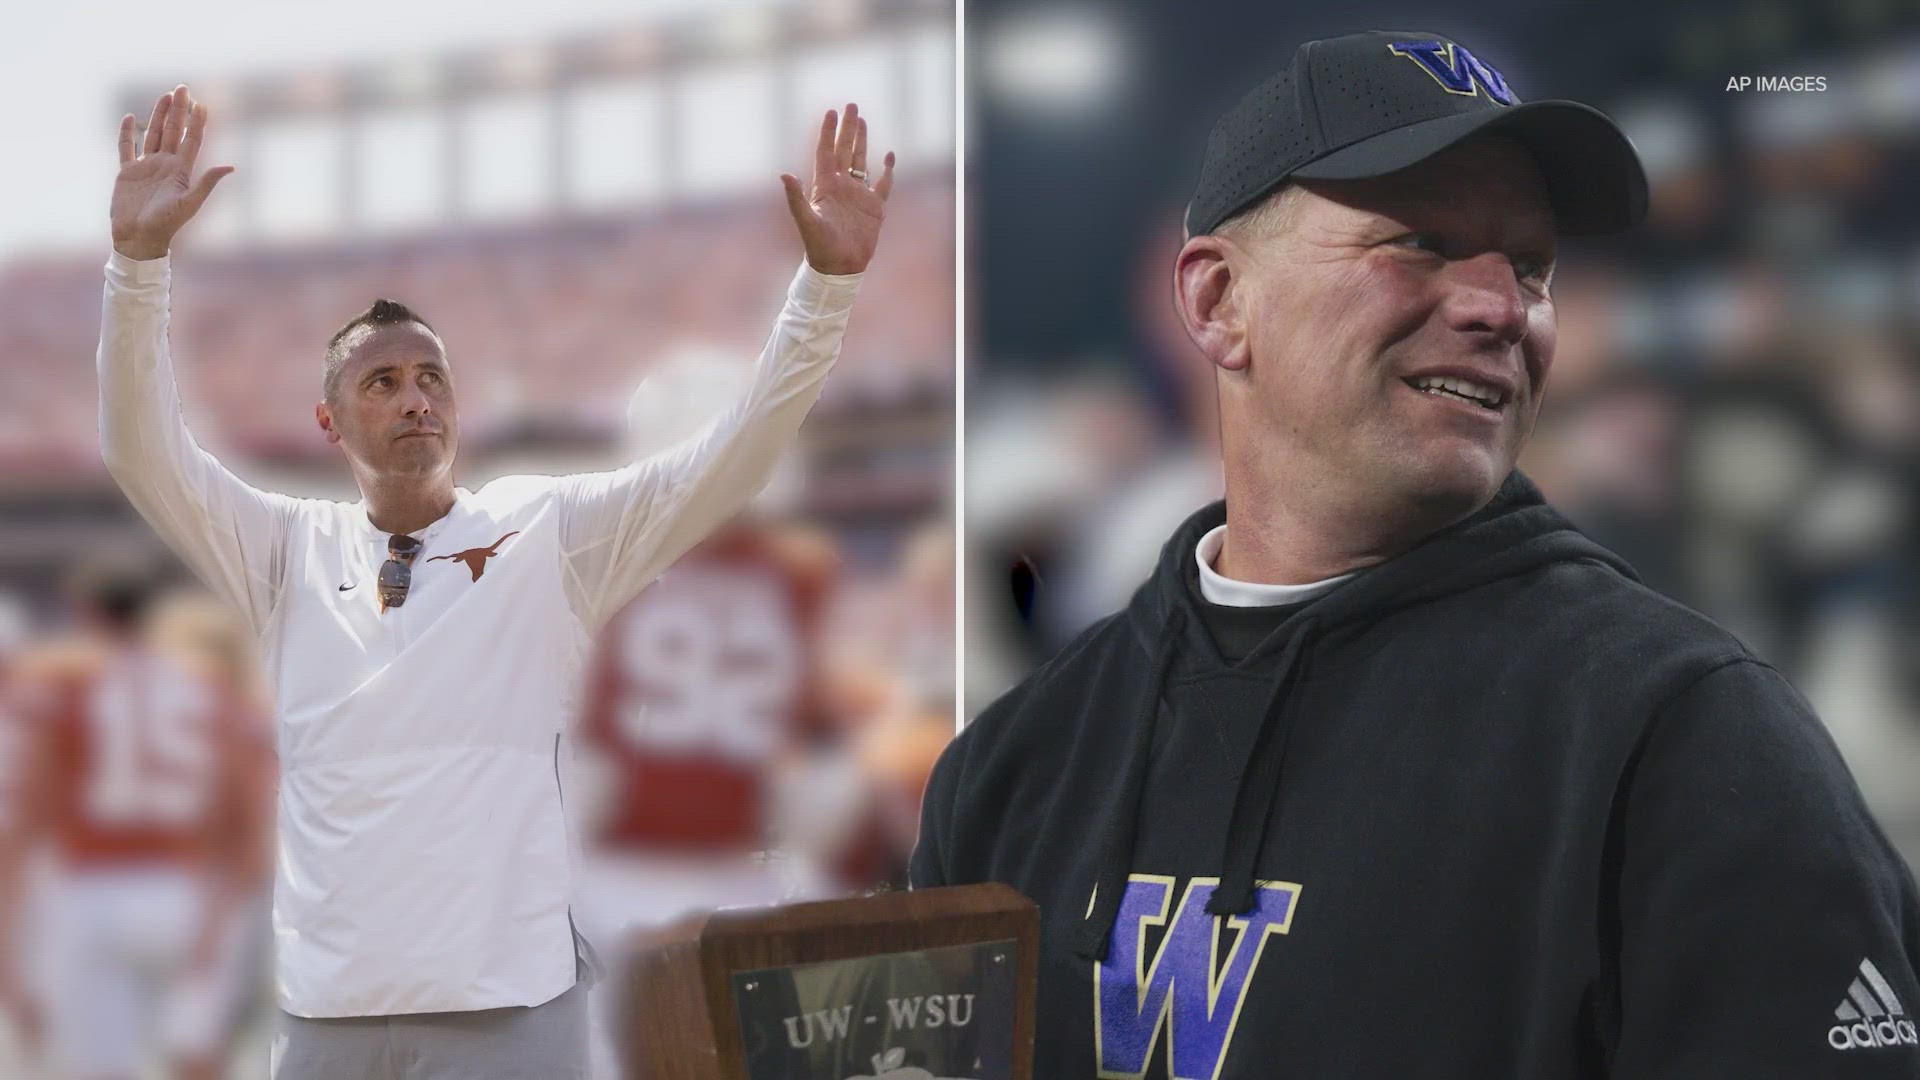 The Longhorns and Huskies meet Monday night for a spot in the College Football Playoff national championship game.